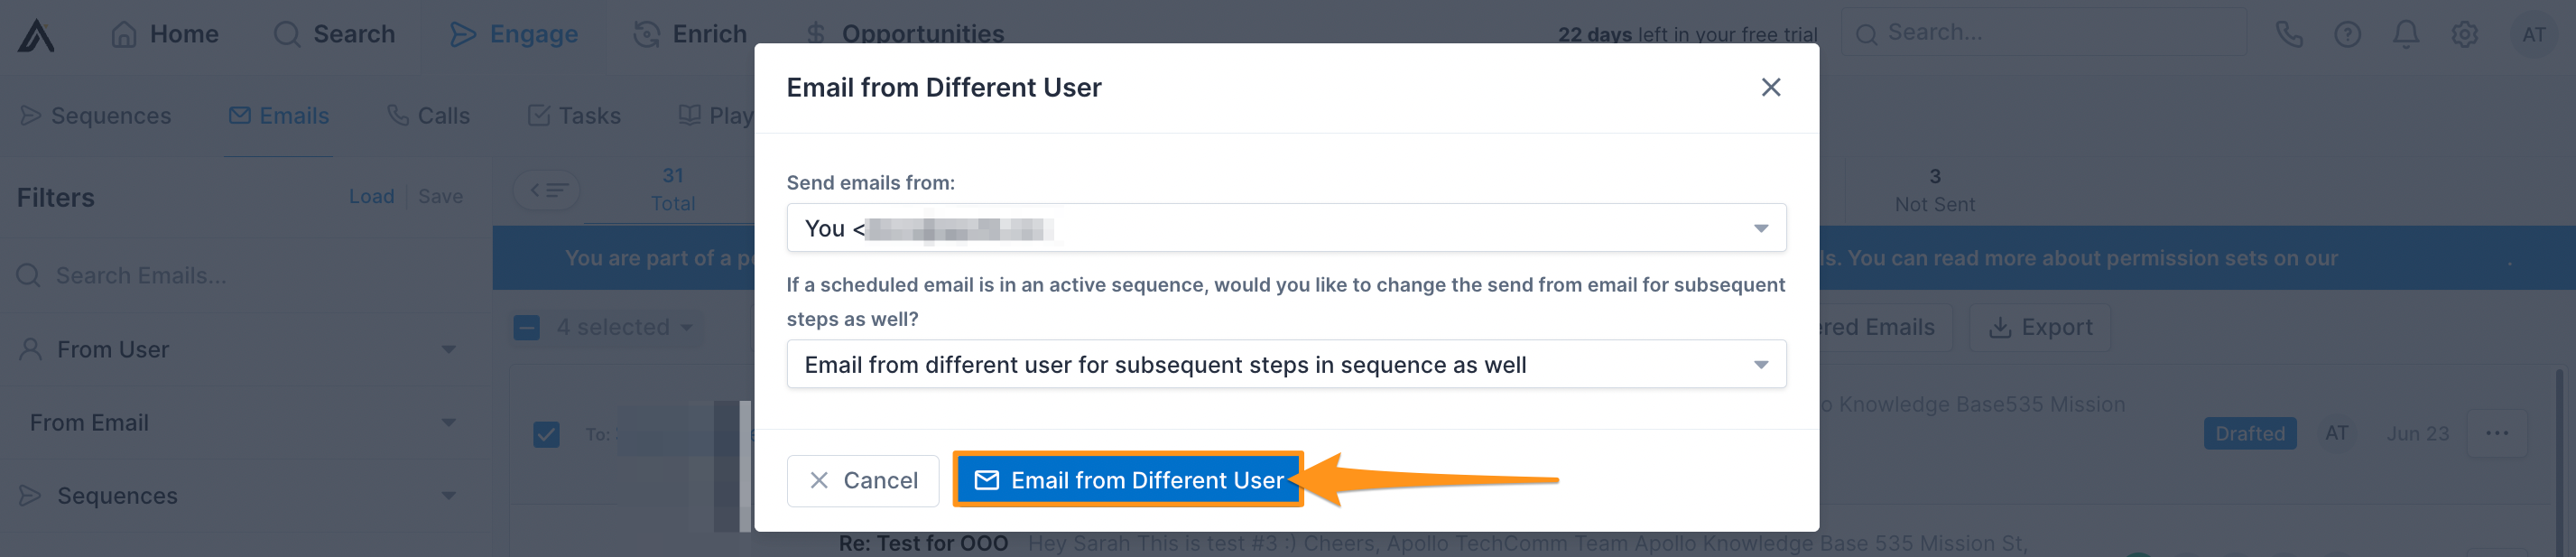 Email for Different User Button